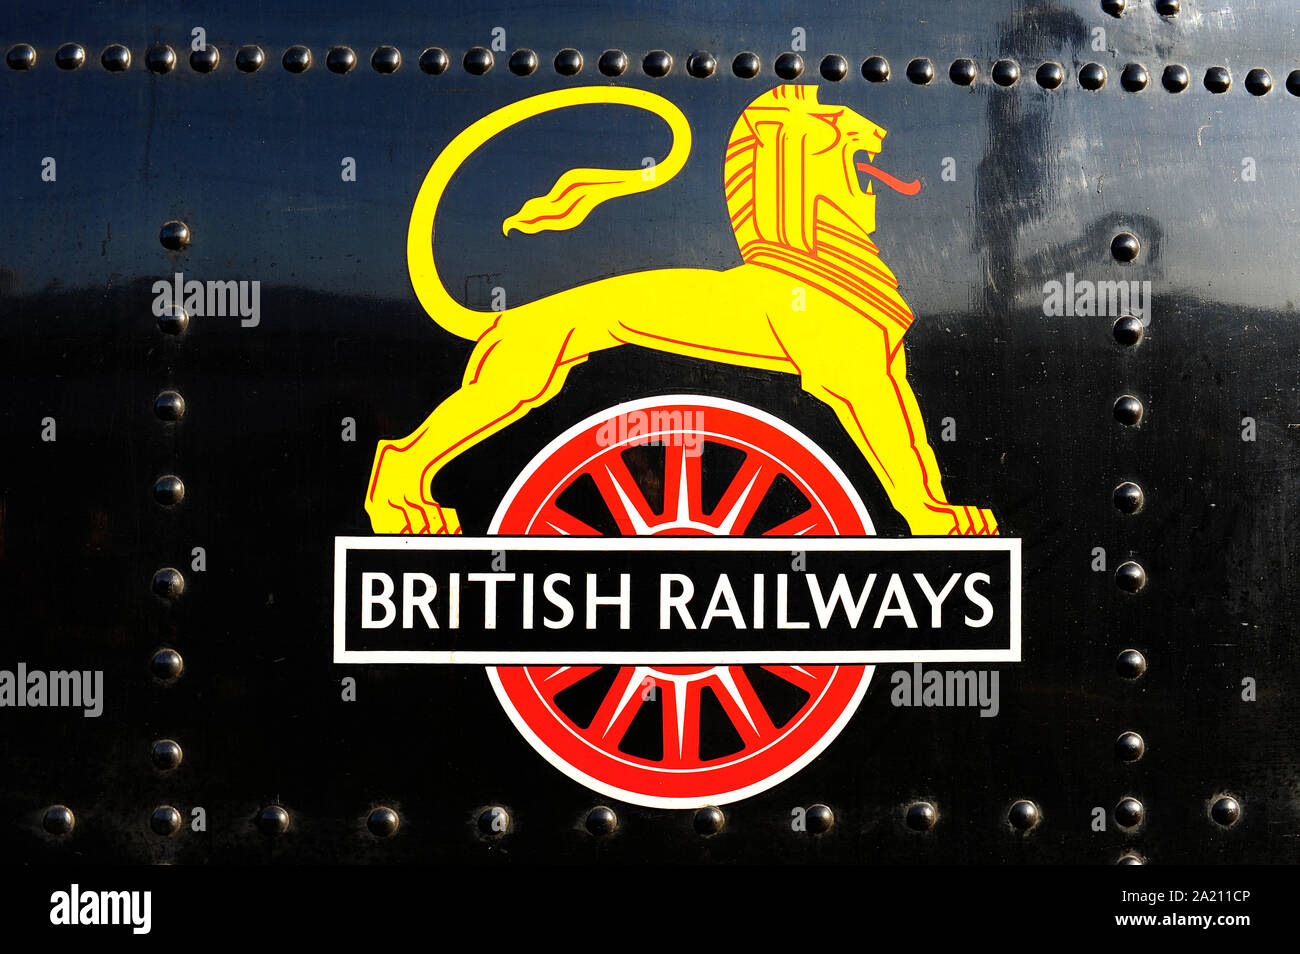 The old British Railways logo on the side of a steam locomotive Stock Photo